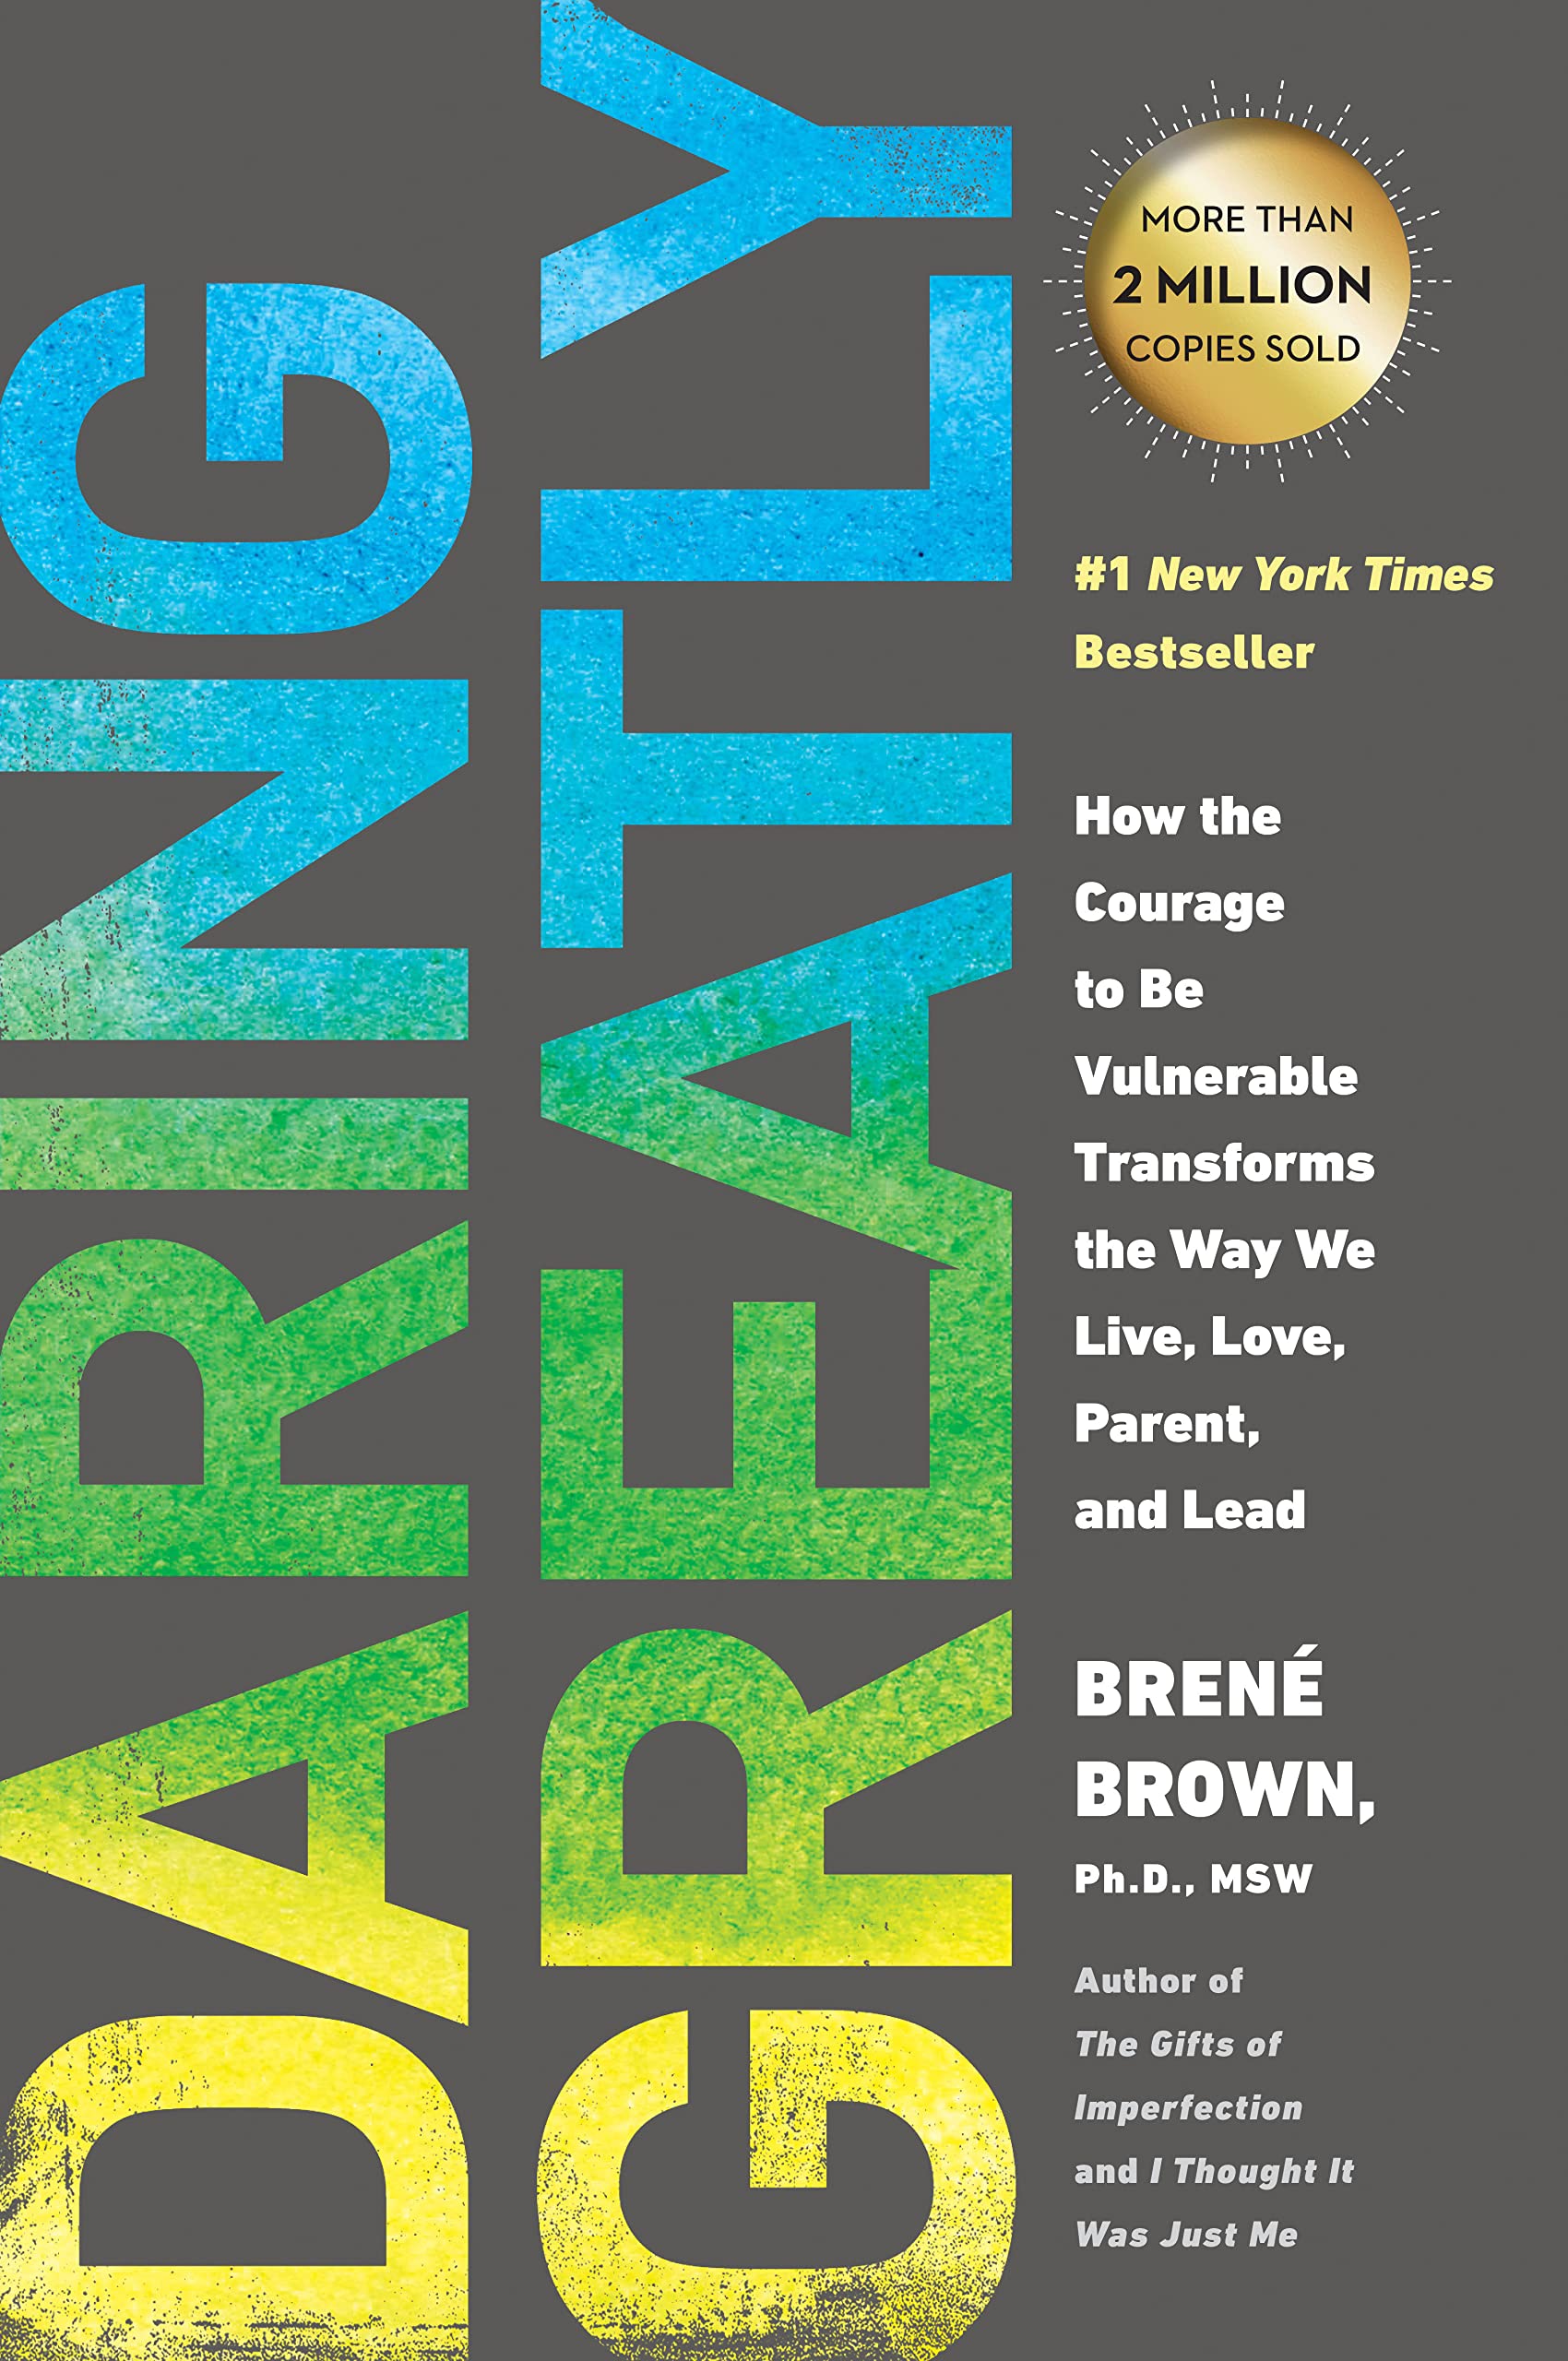 Daring Greatly: How the Courage to Be Vulnerable Transforms the Way We Live, Love, Parent, and Lead Paperback